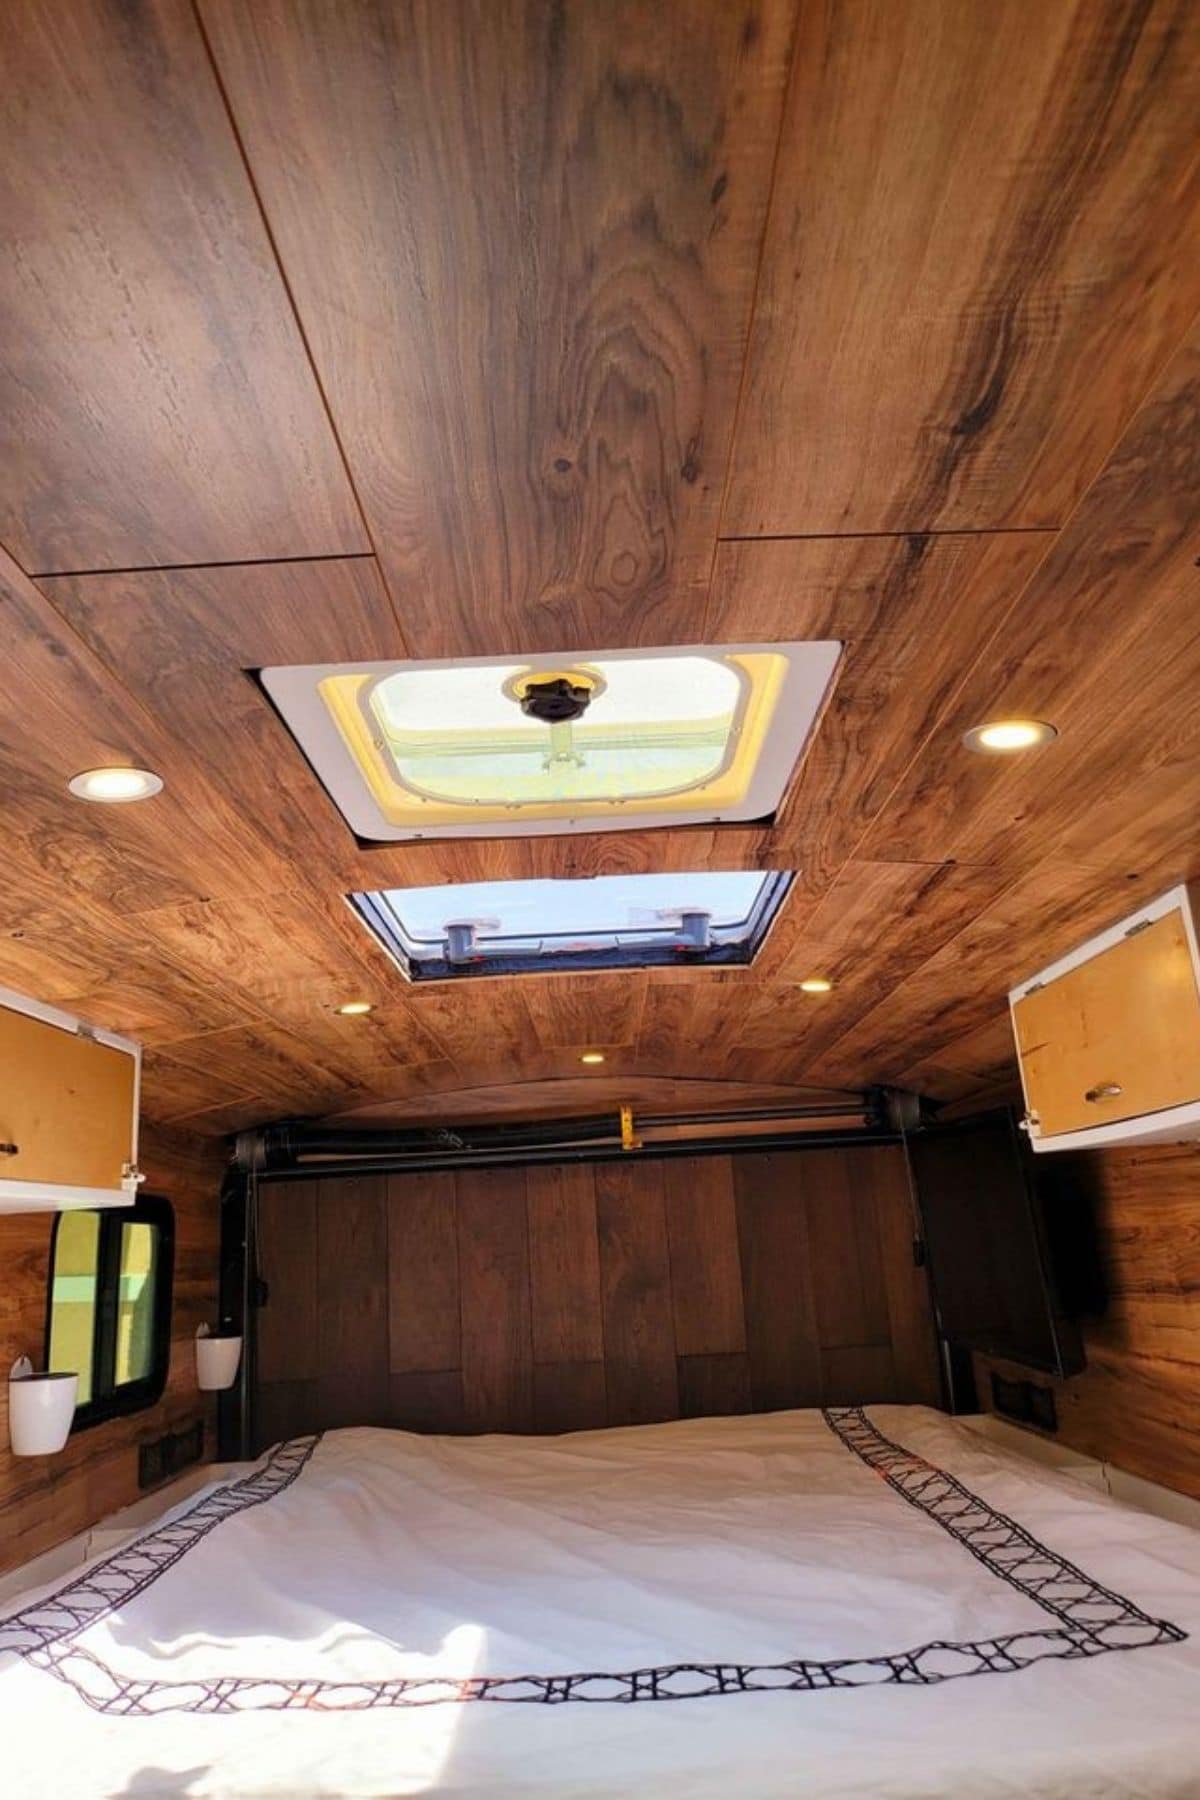 Ventilation and skylight openings on ceiling of tiny home